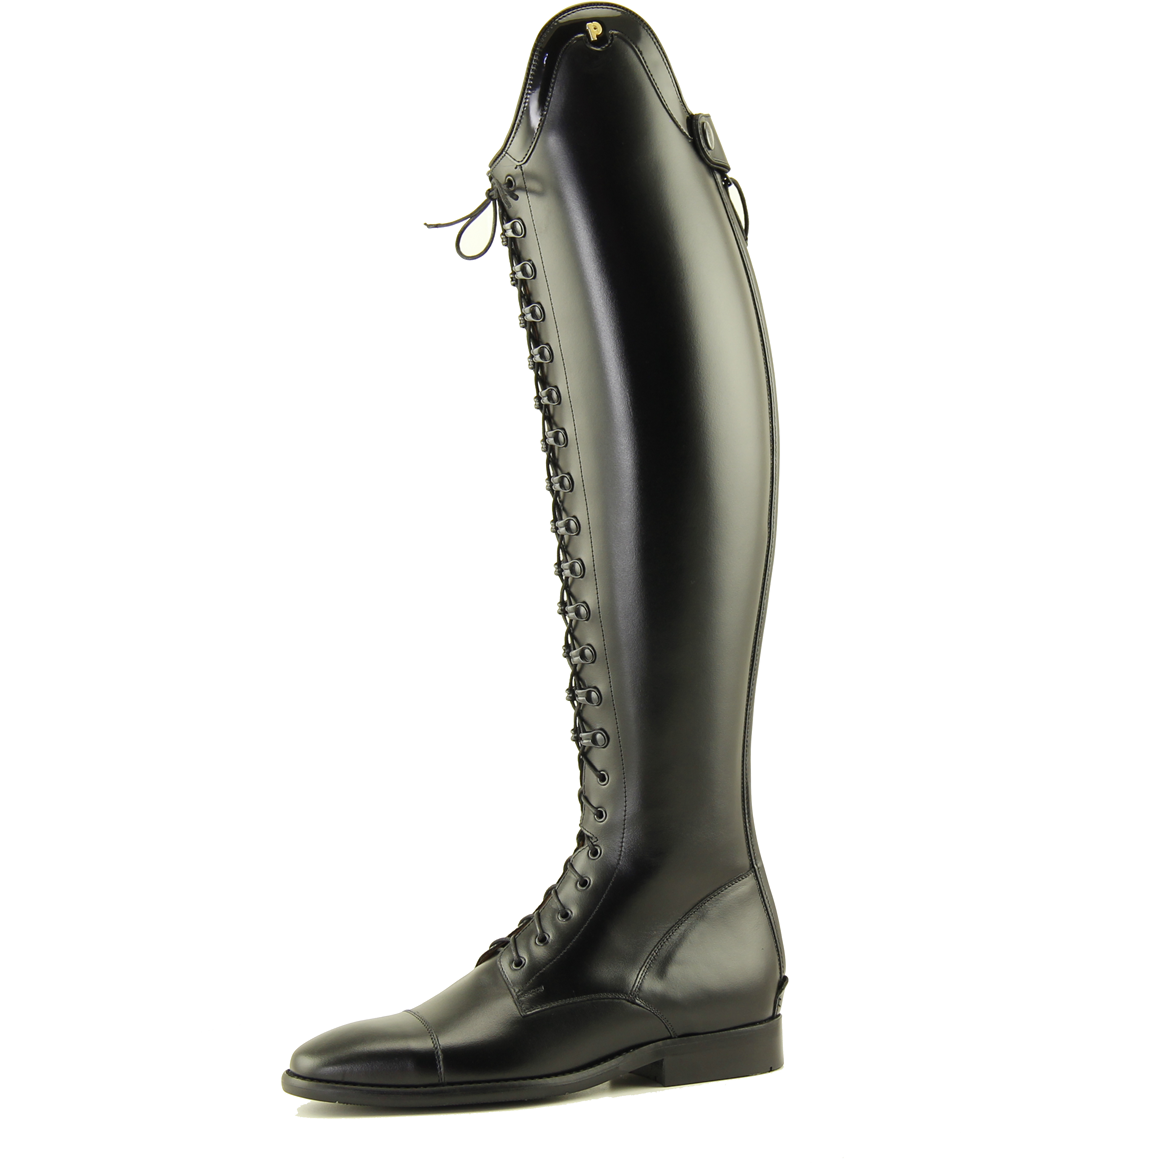 Petrie Rimini Boot - we have some stock but most sizes are to order